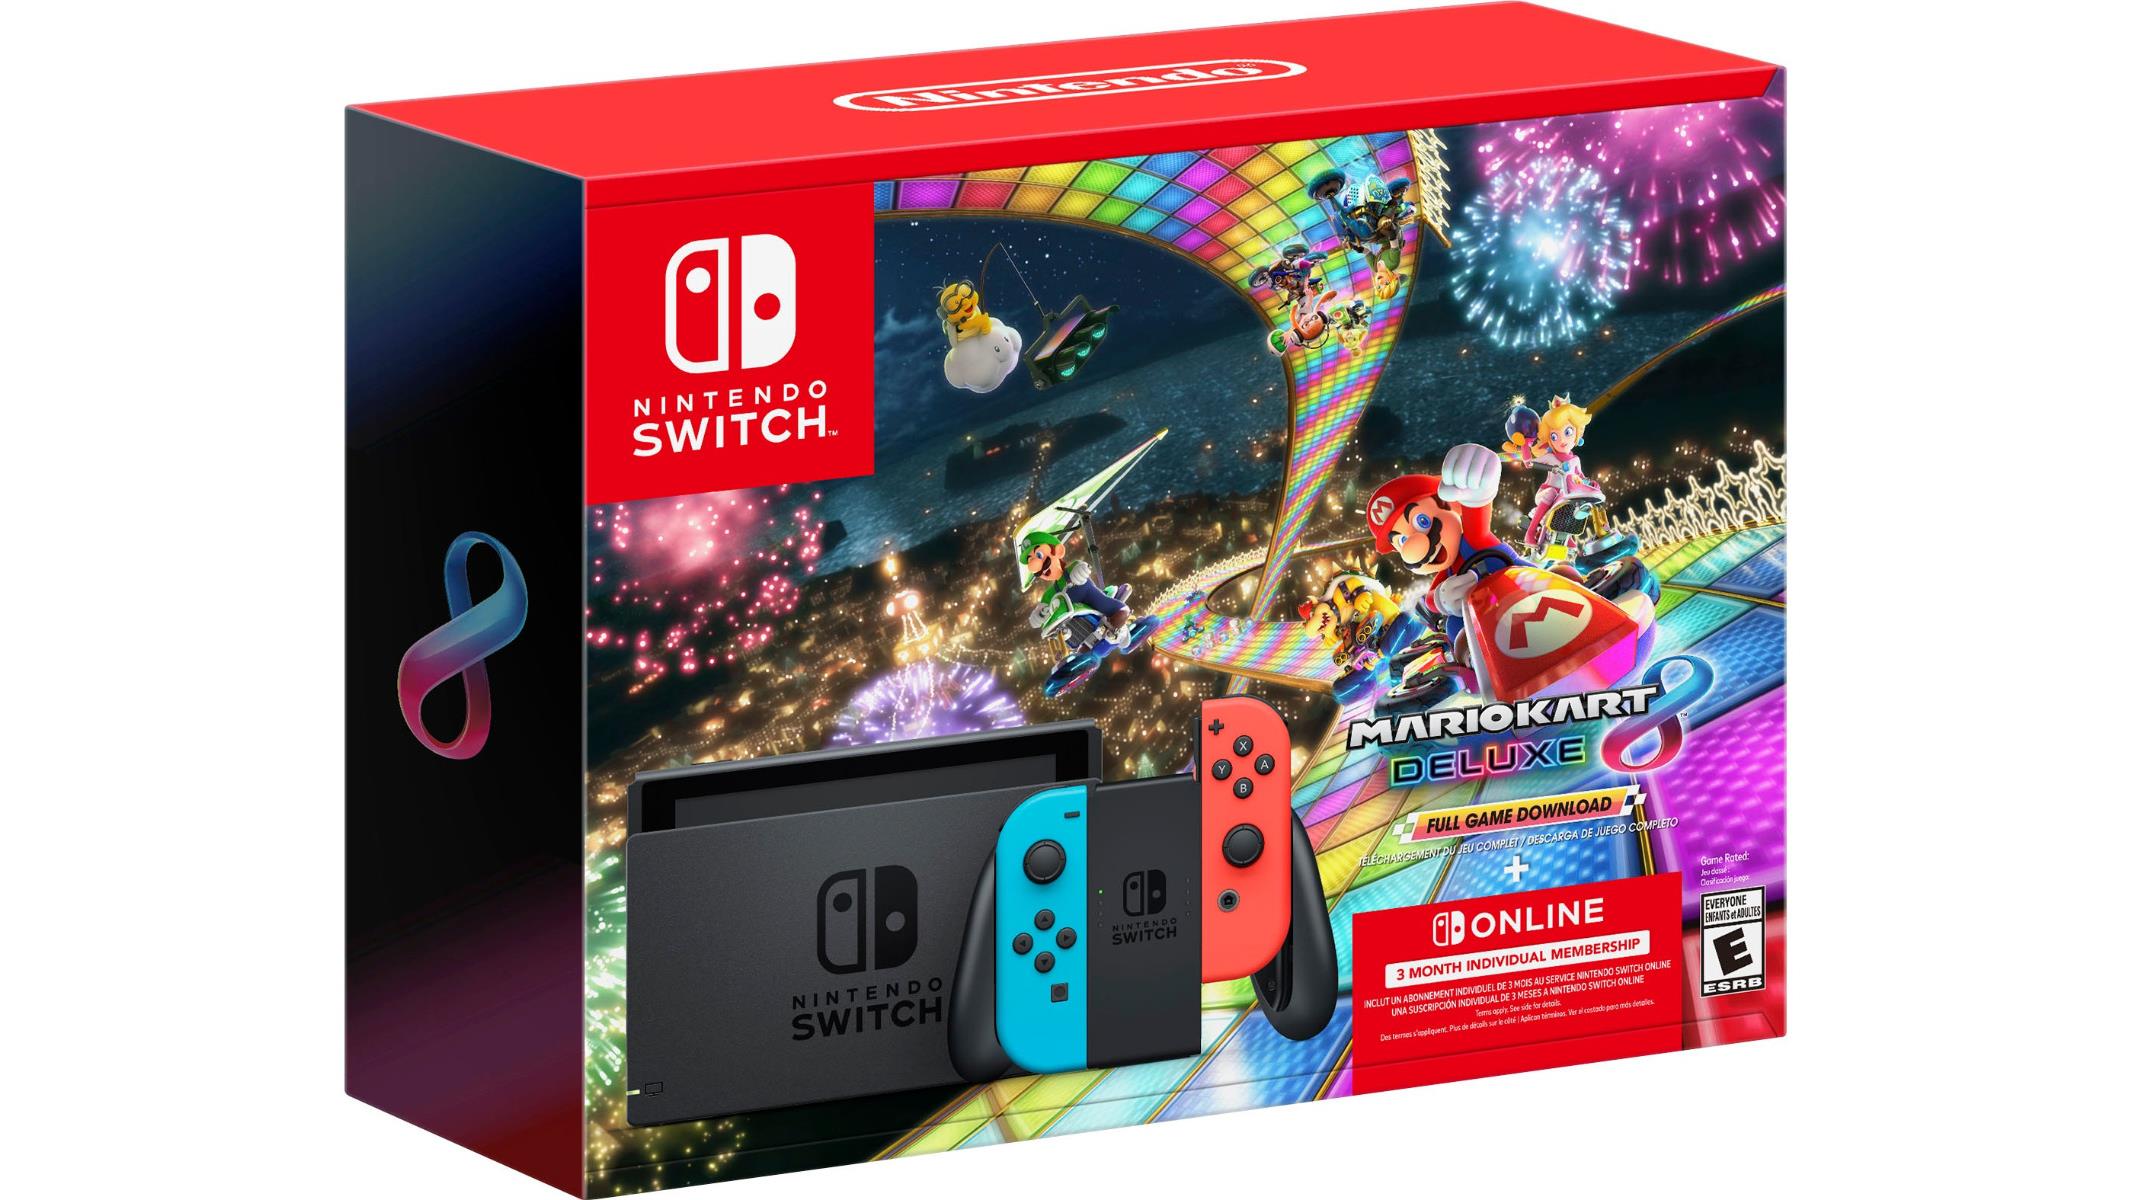 Score A Nintendo Switch, Mario Kart 8 Deluxe And 3-Month Online